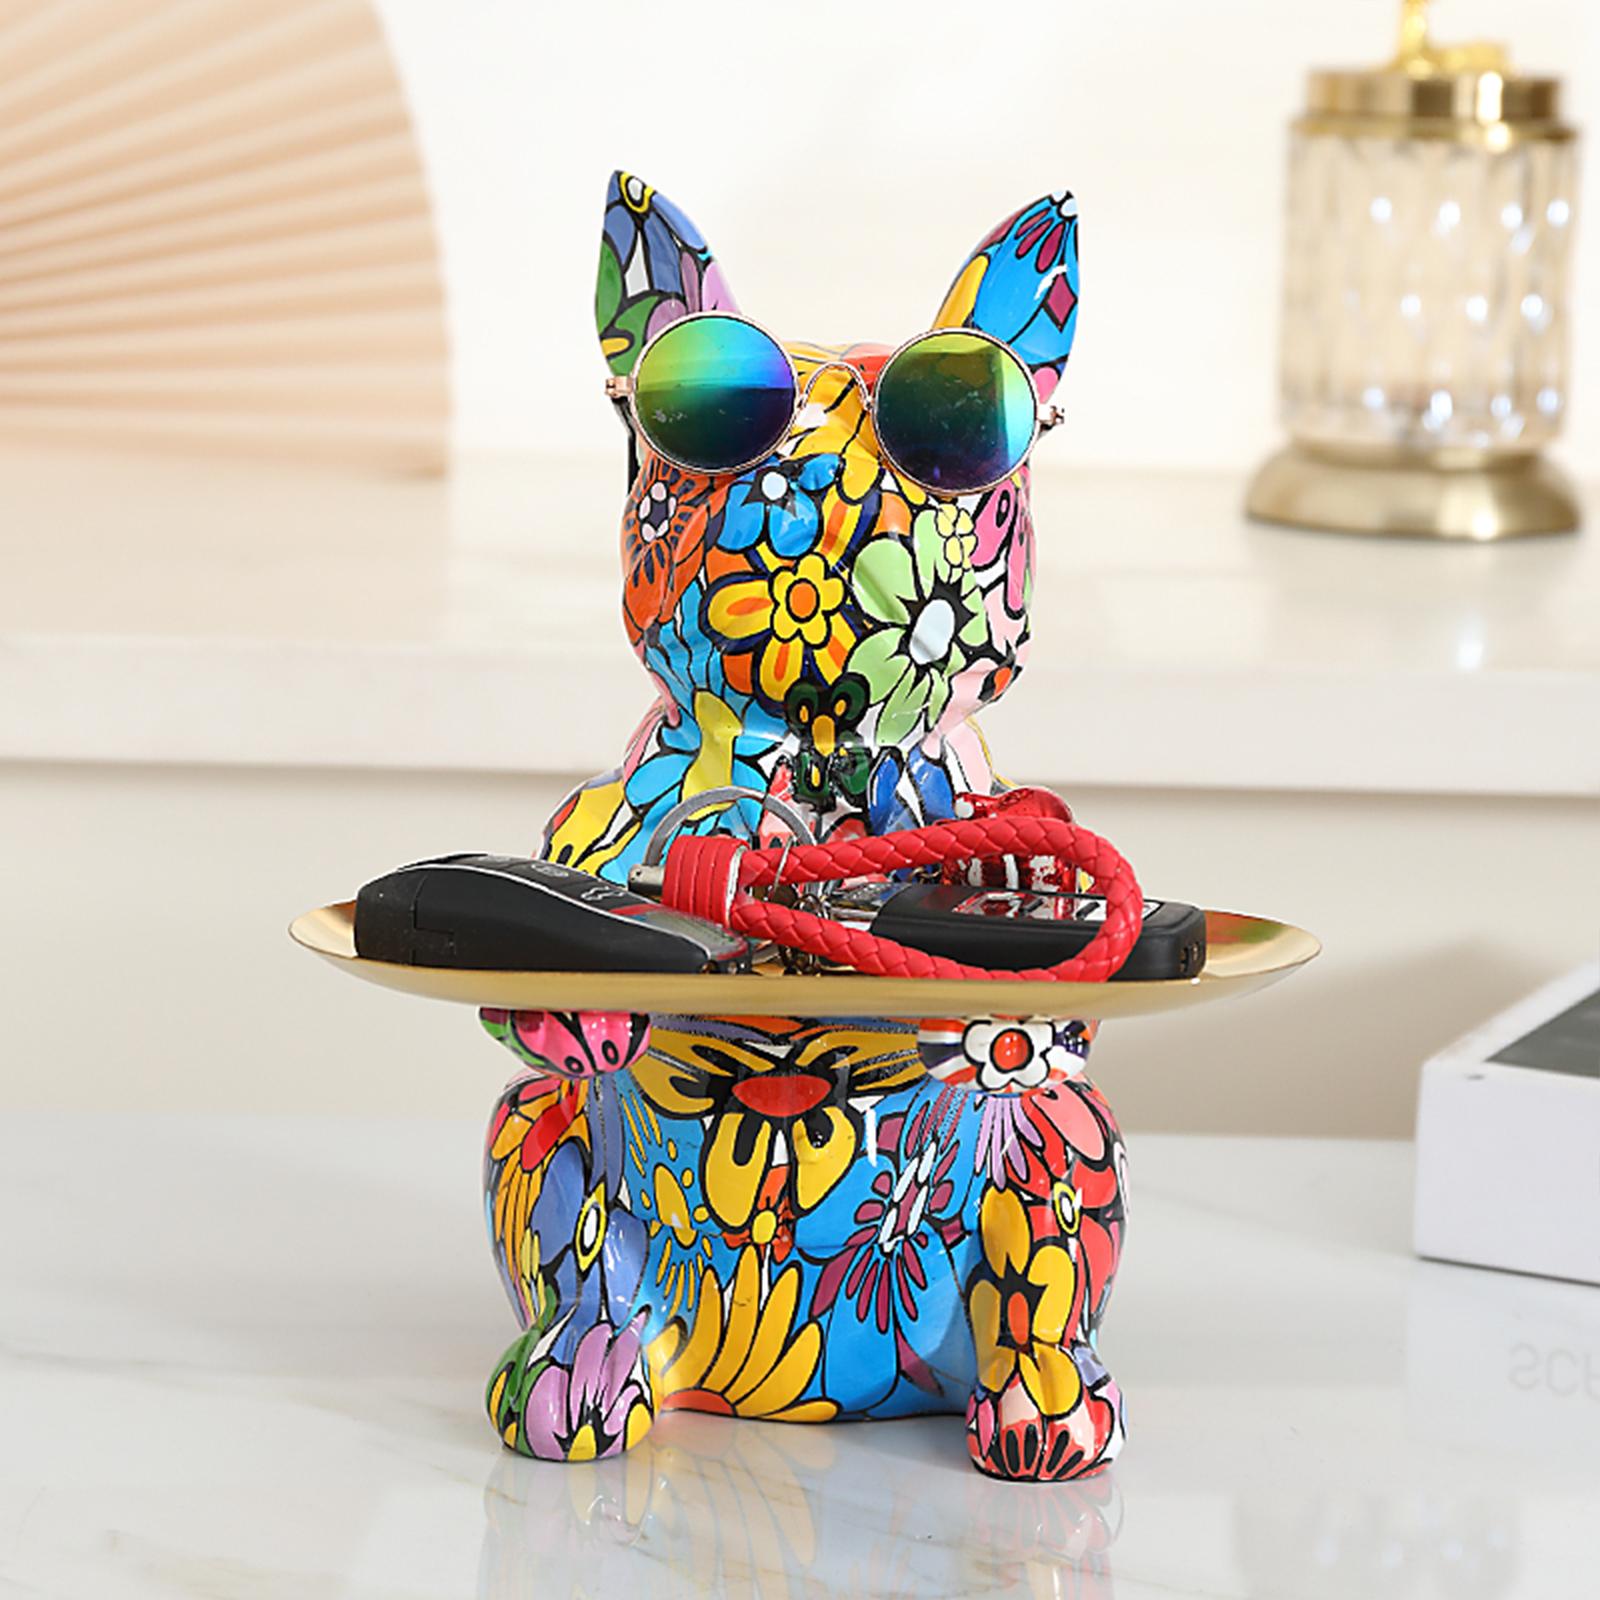 Dog Statue Storage Tray Modern Ornament Fruit Tray for Home Shop Living Room Flower